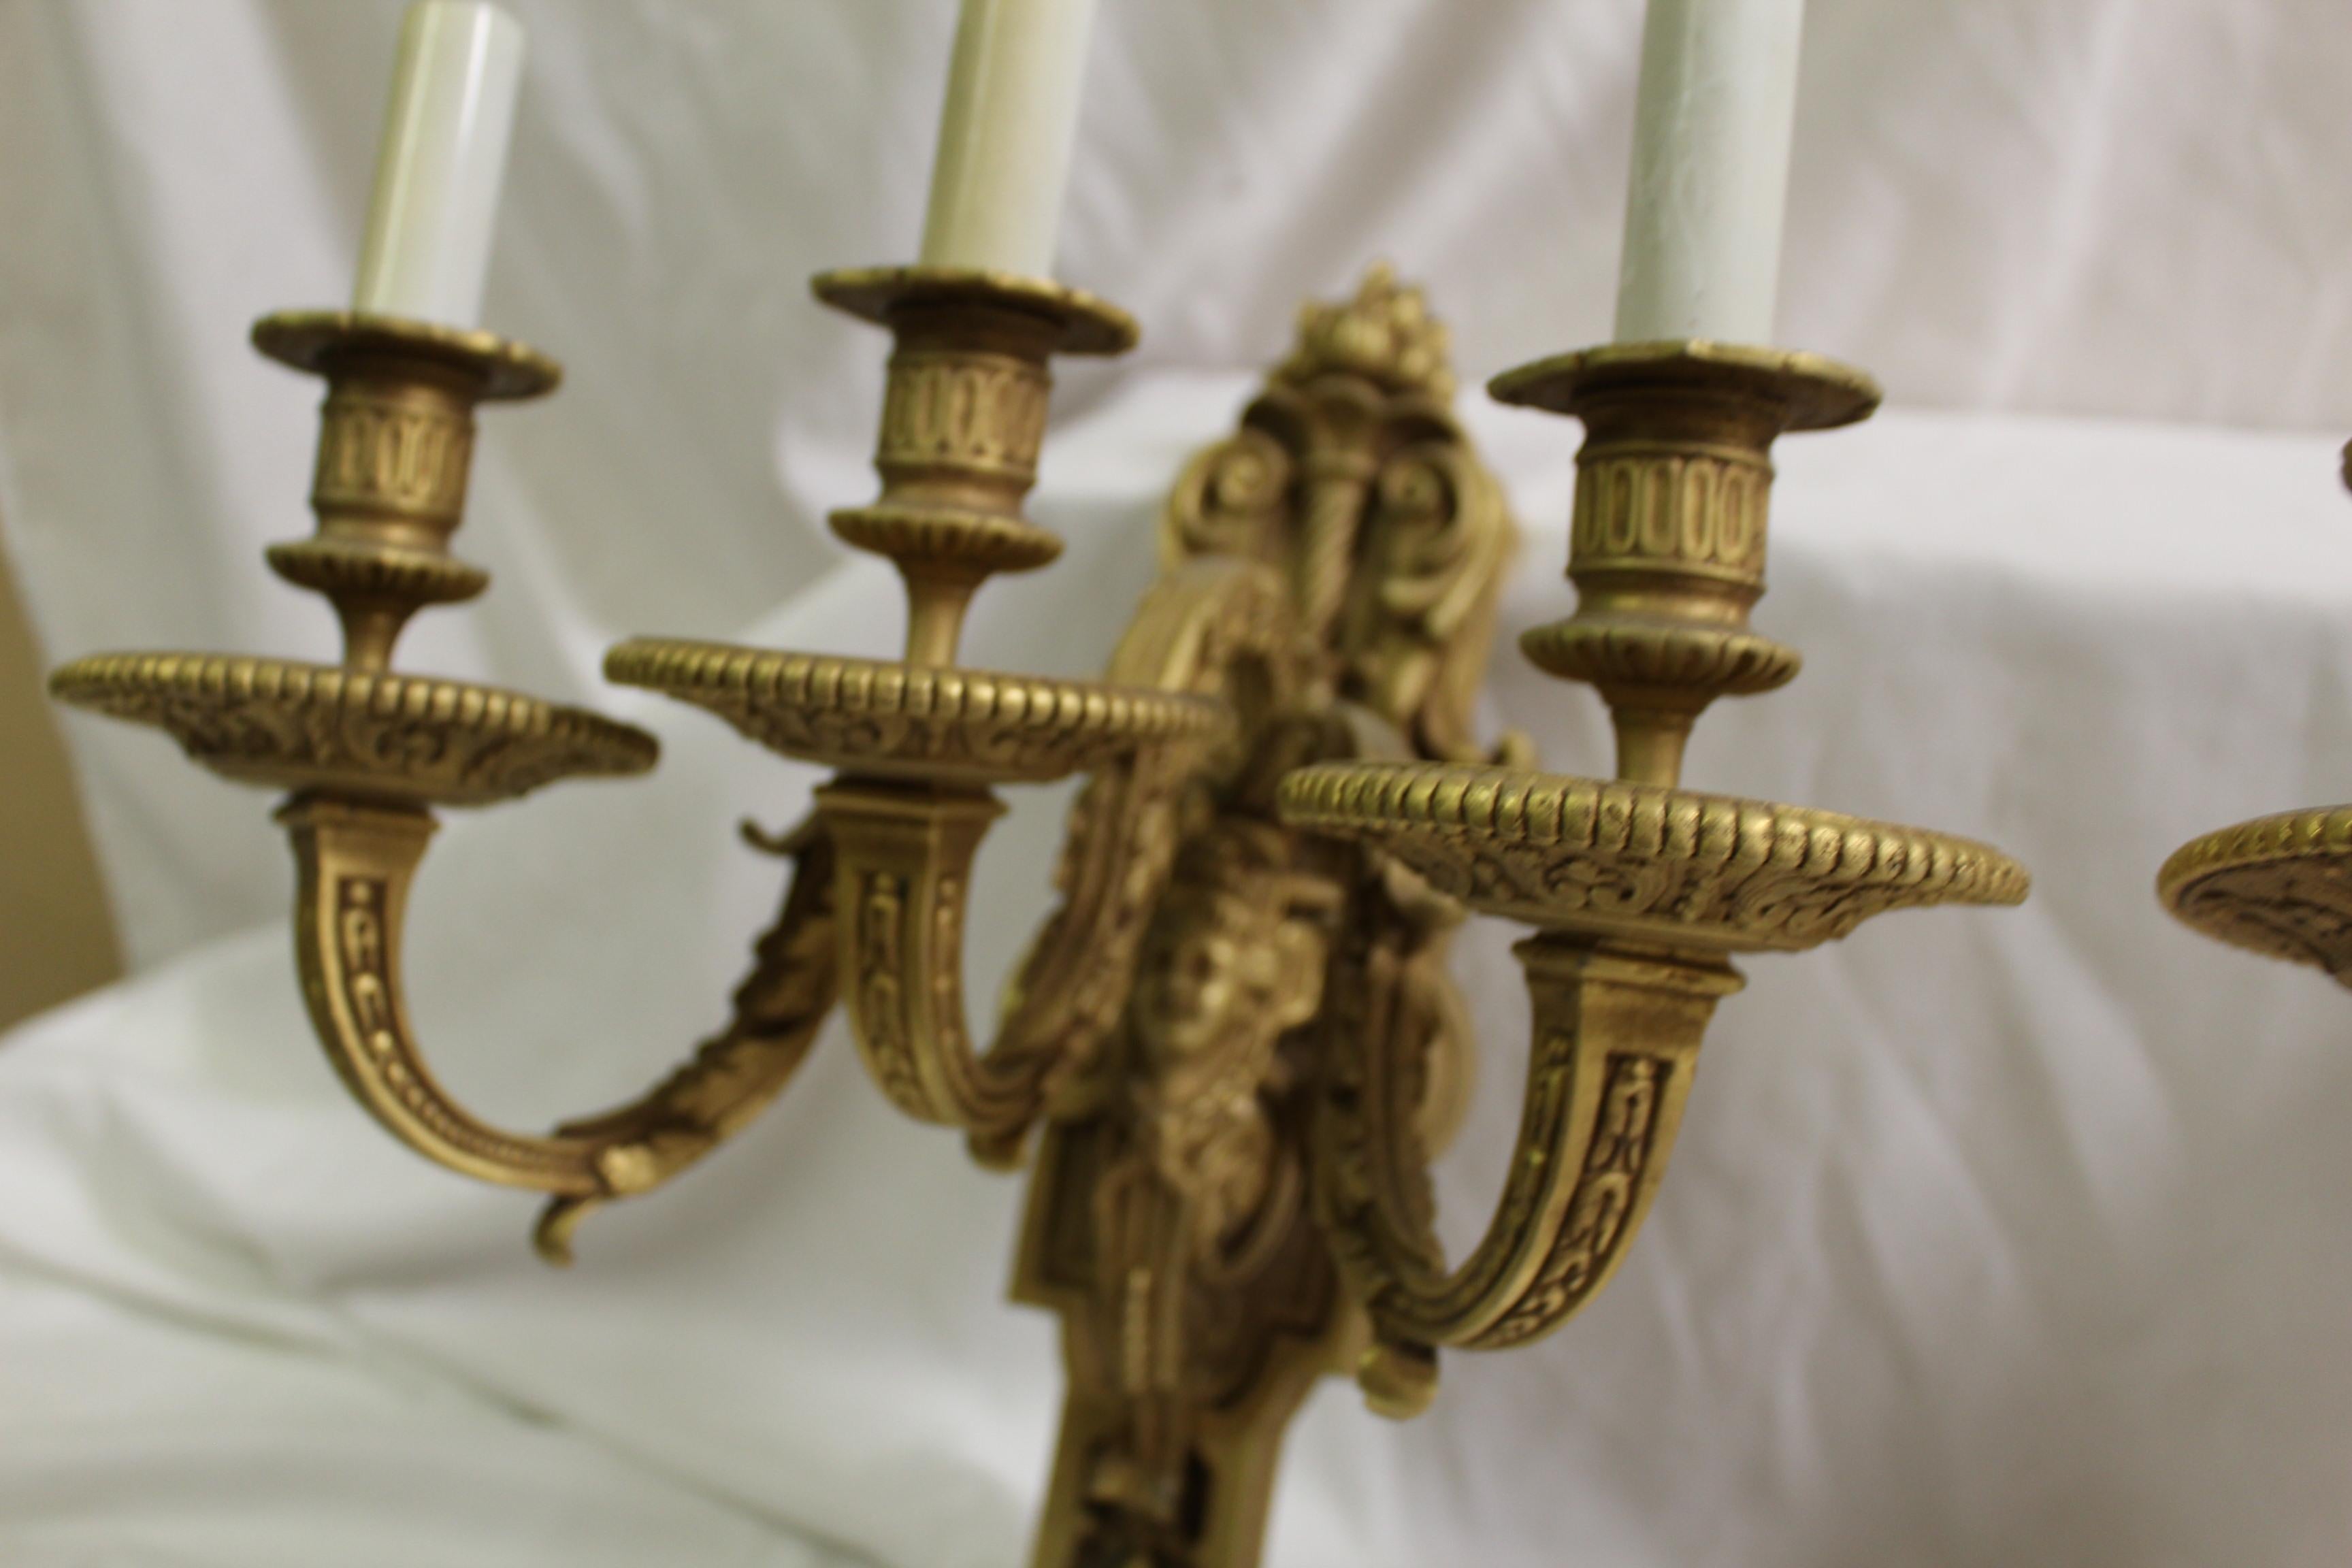 HI-quality castings in fine details made from the original . All metal finished in a polished Antique Gold Dore